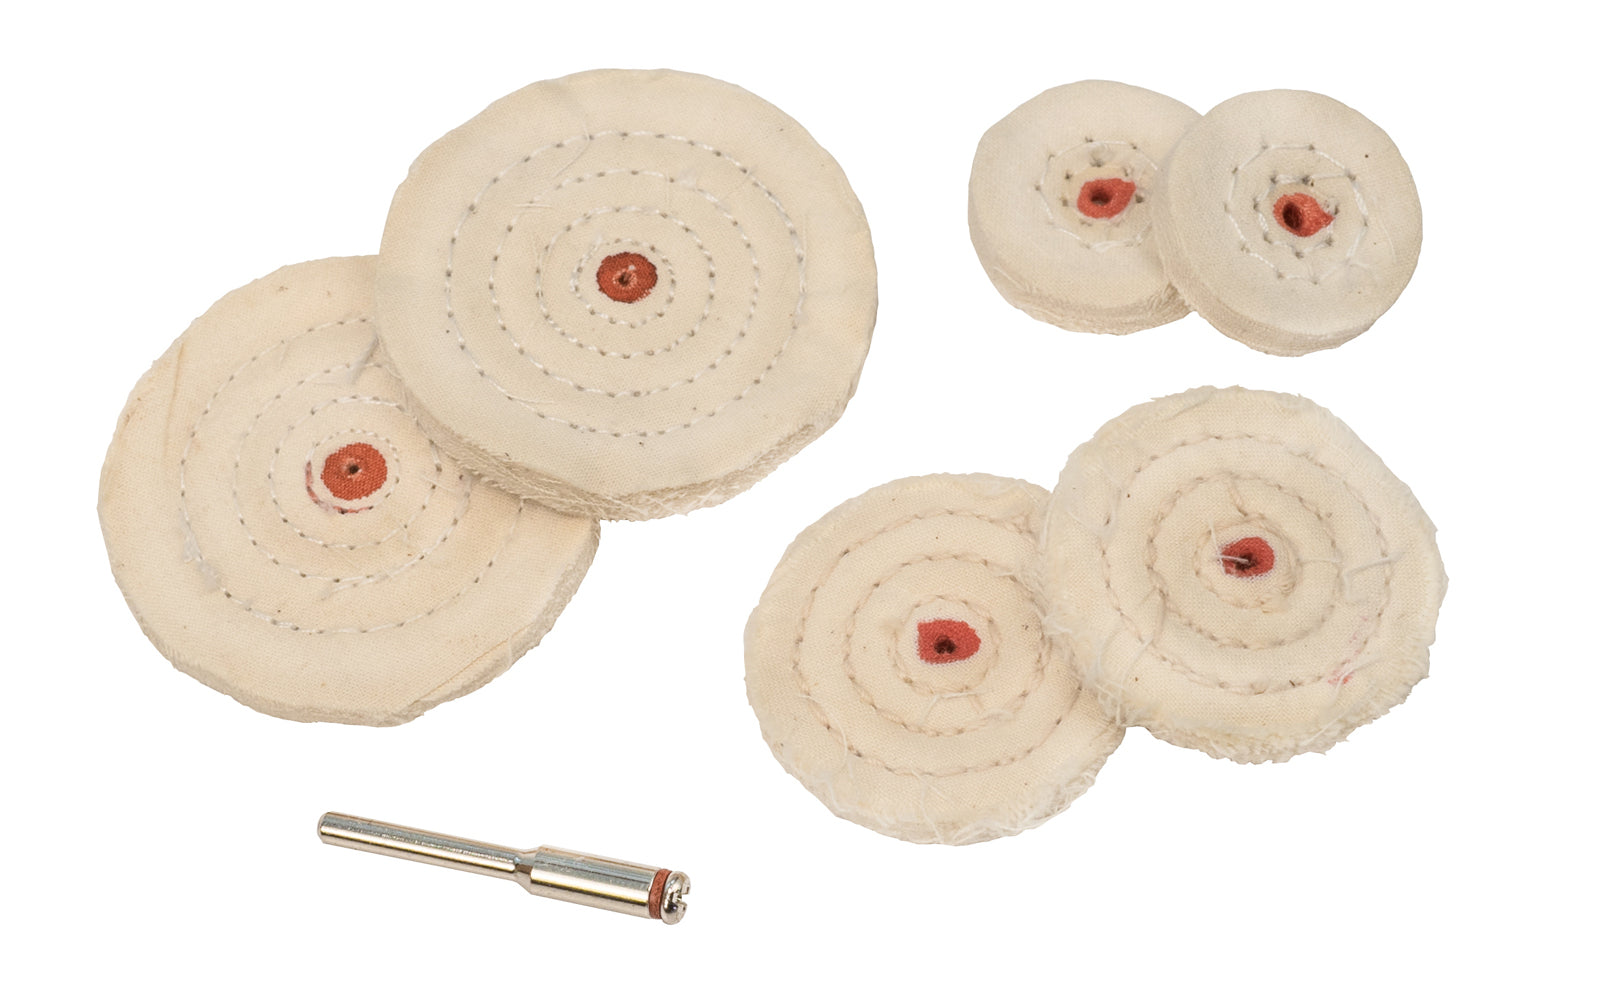 The Mini Buffing Wheel Kit With Mandrel ~ 6 Cushion Sewn Buffs cleans & polishes antiques, jewelry, ornamental hardware. Ideal for detailing & tight spaces. ~ Dico Polishing Company 527-72 ~ Made in USA ~ 082123527725